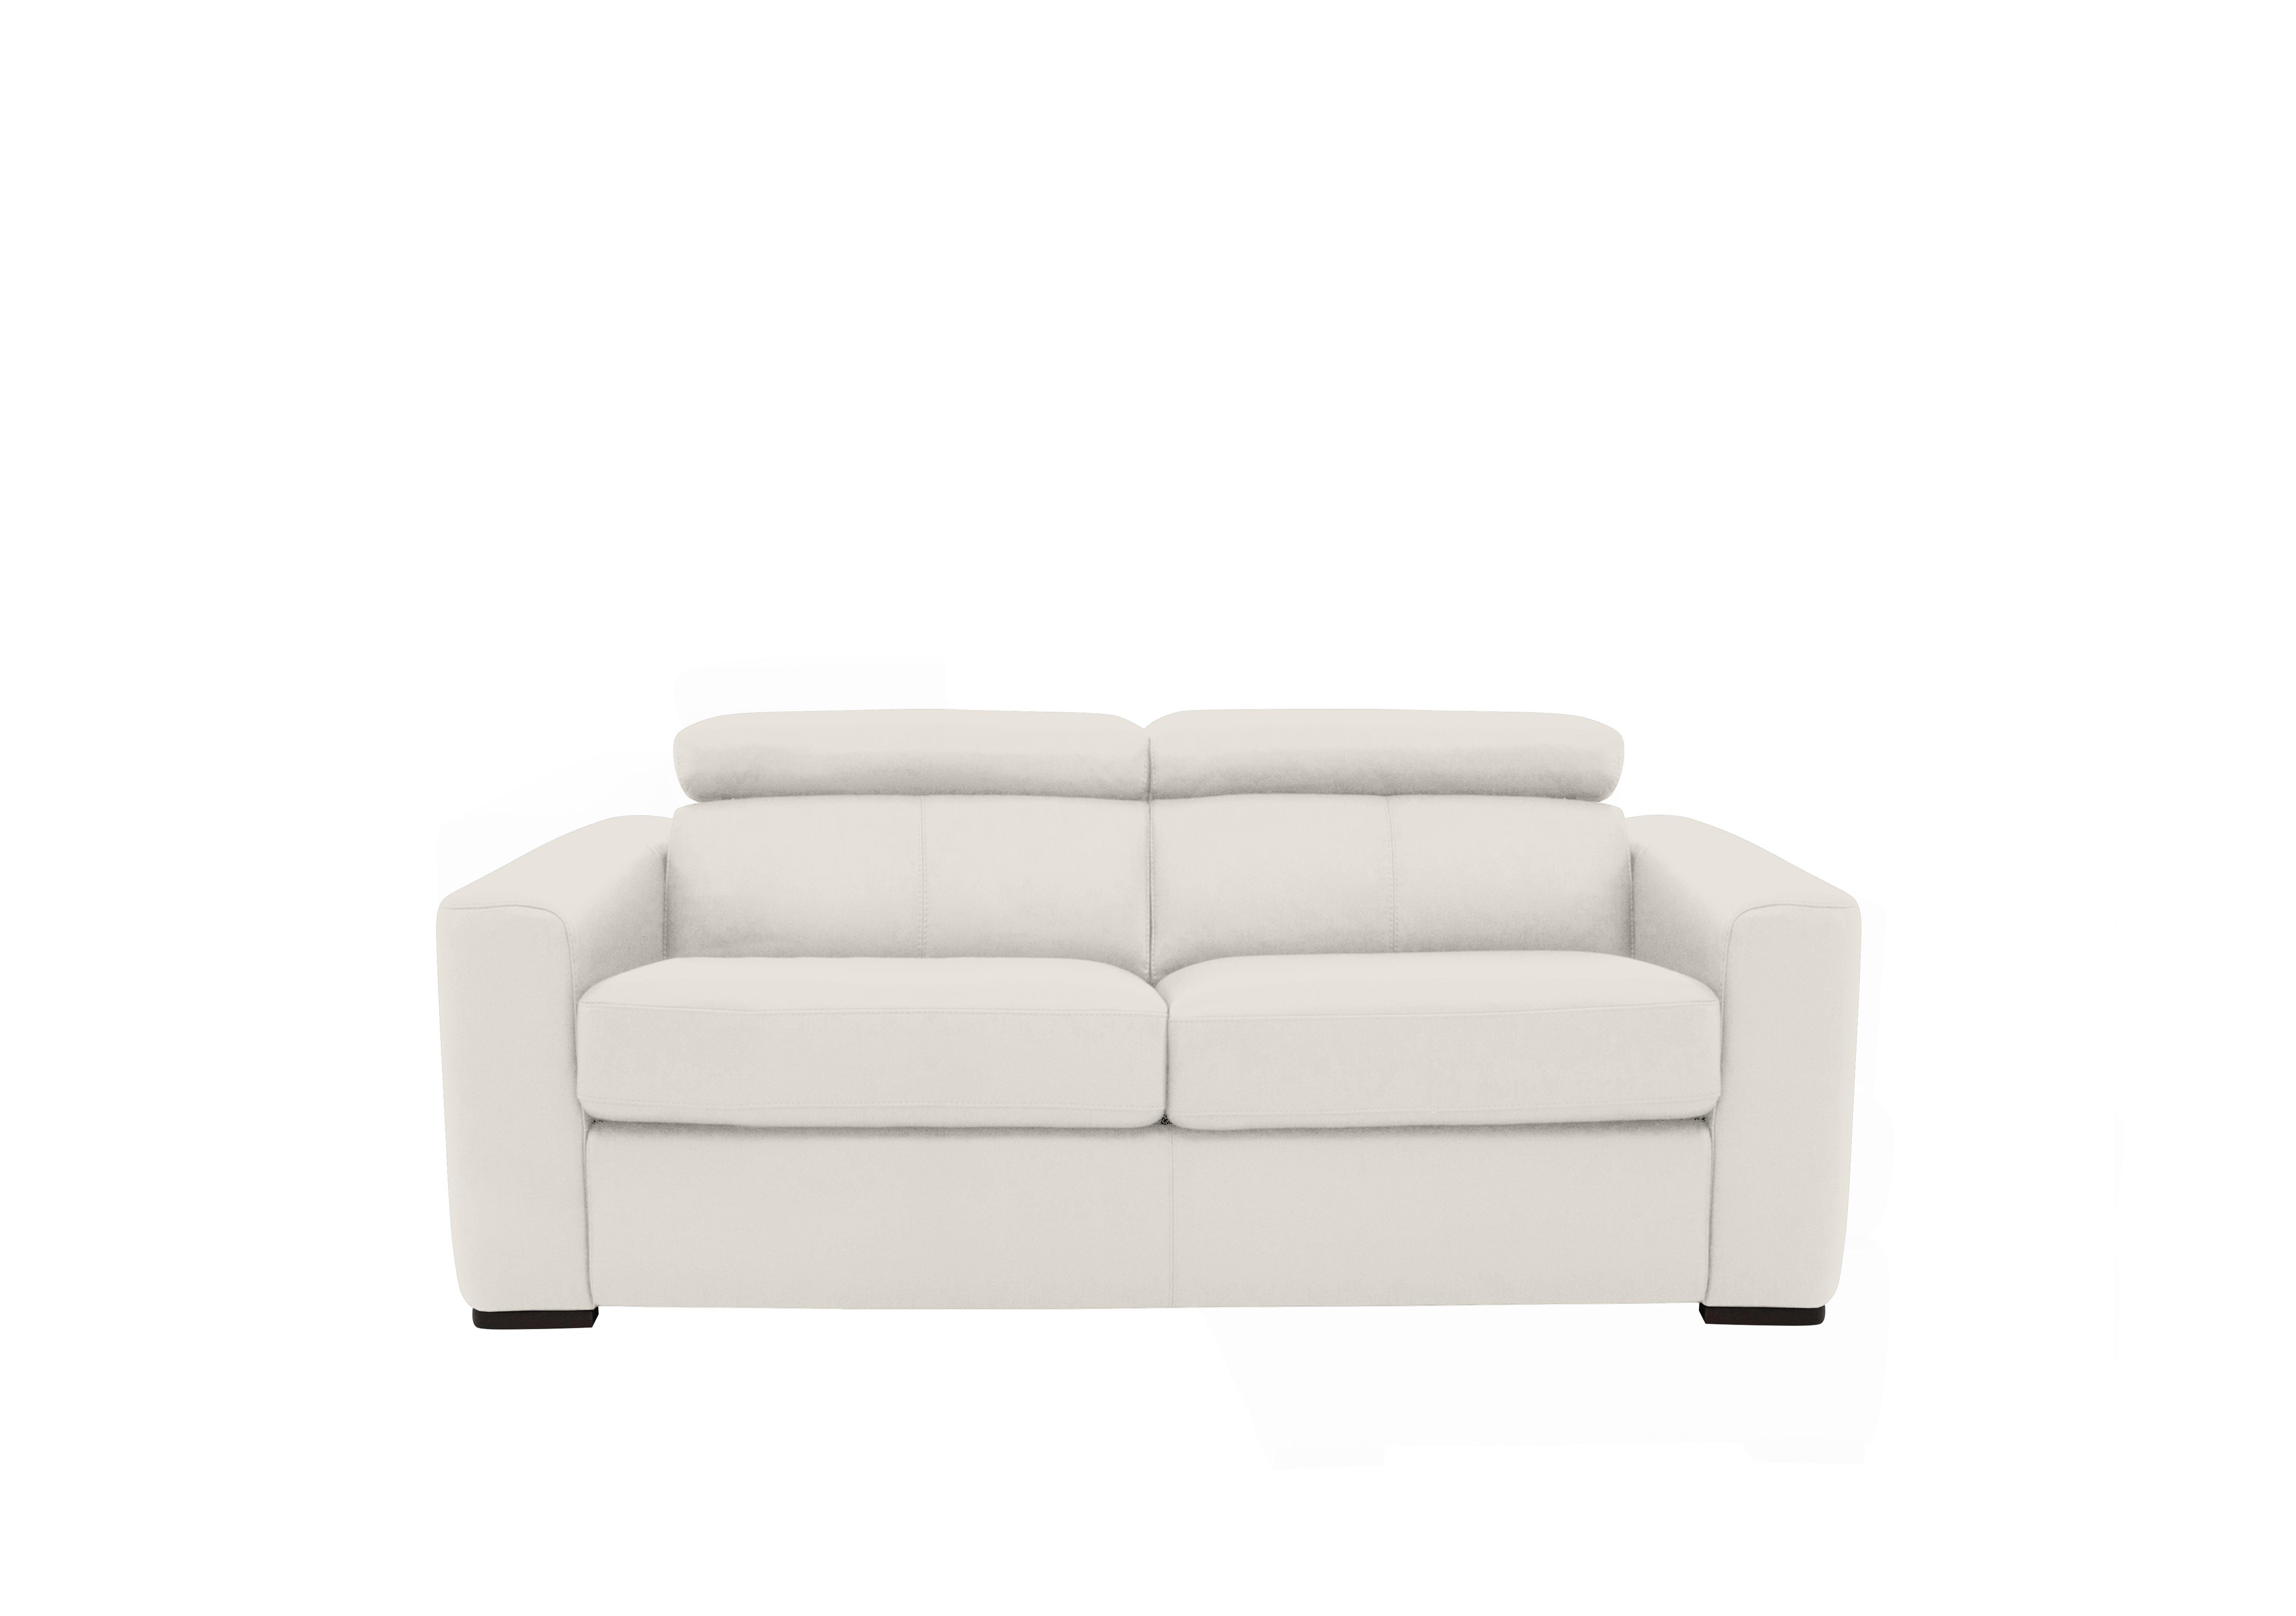 Infinity 2 Seater Leather Sofa in Bv-744d Star White on Furniture Village